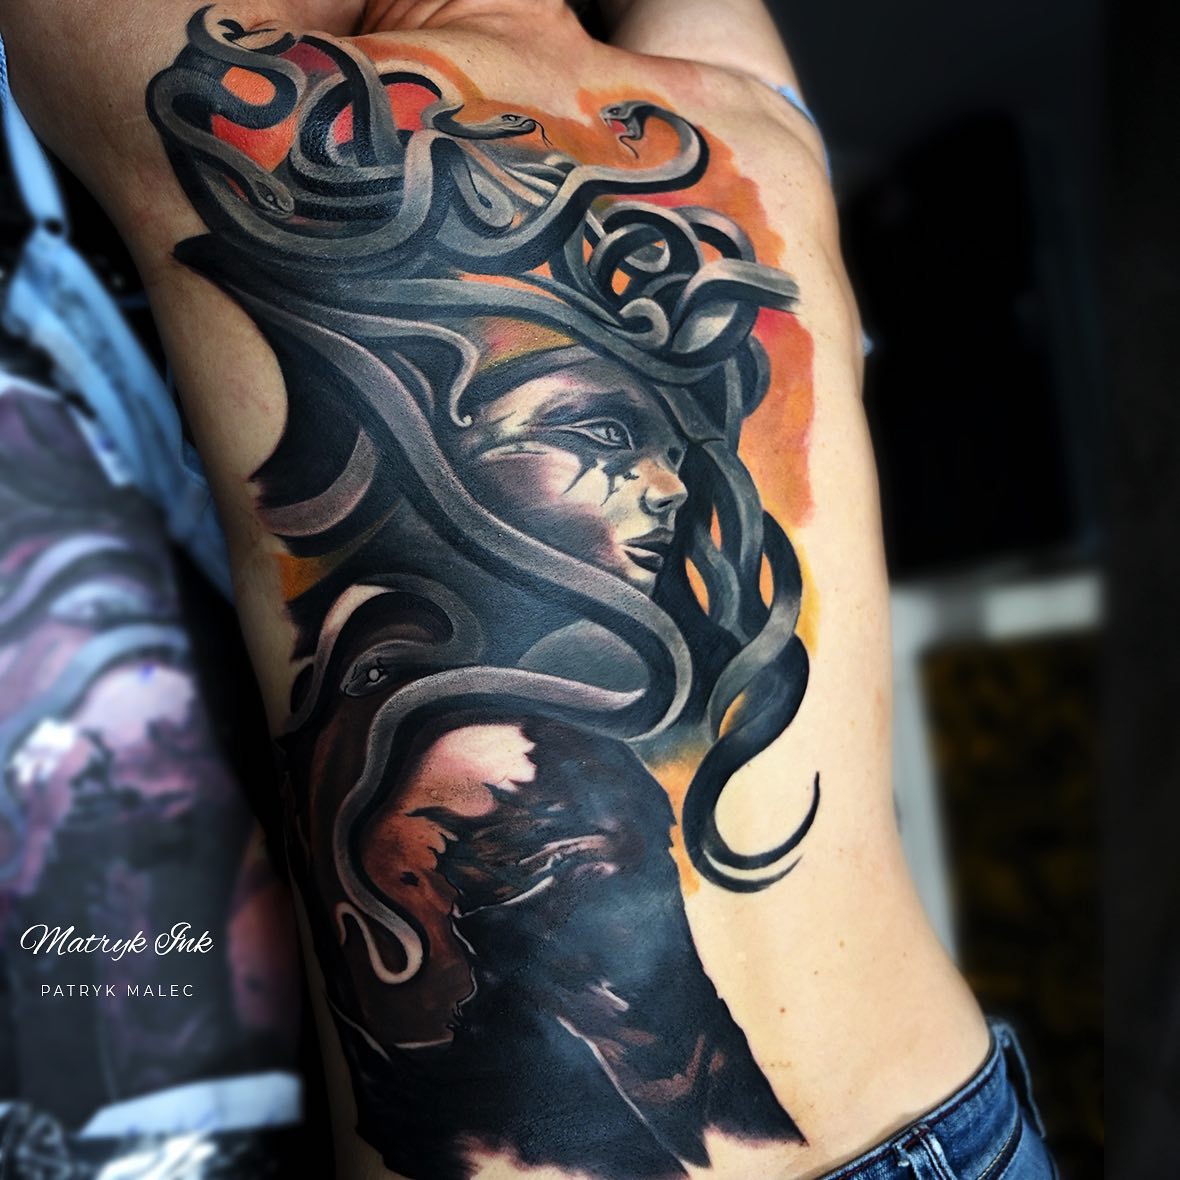 Those who like cover-up tattoos will adore this Medusa tattoo on back. Darker shades of colors take a lot of courage to get on your body, so let's show how bold you are with this.